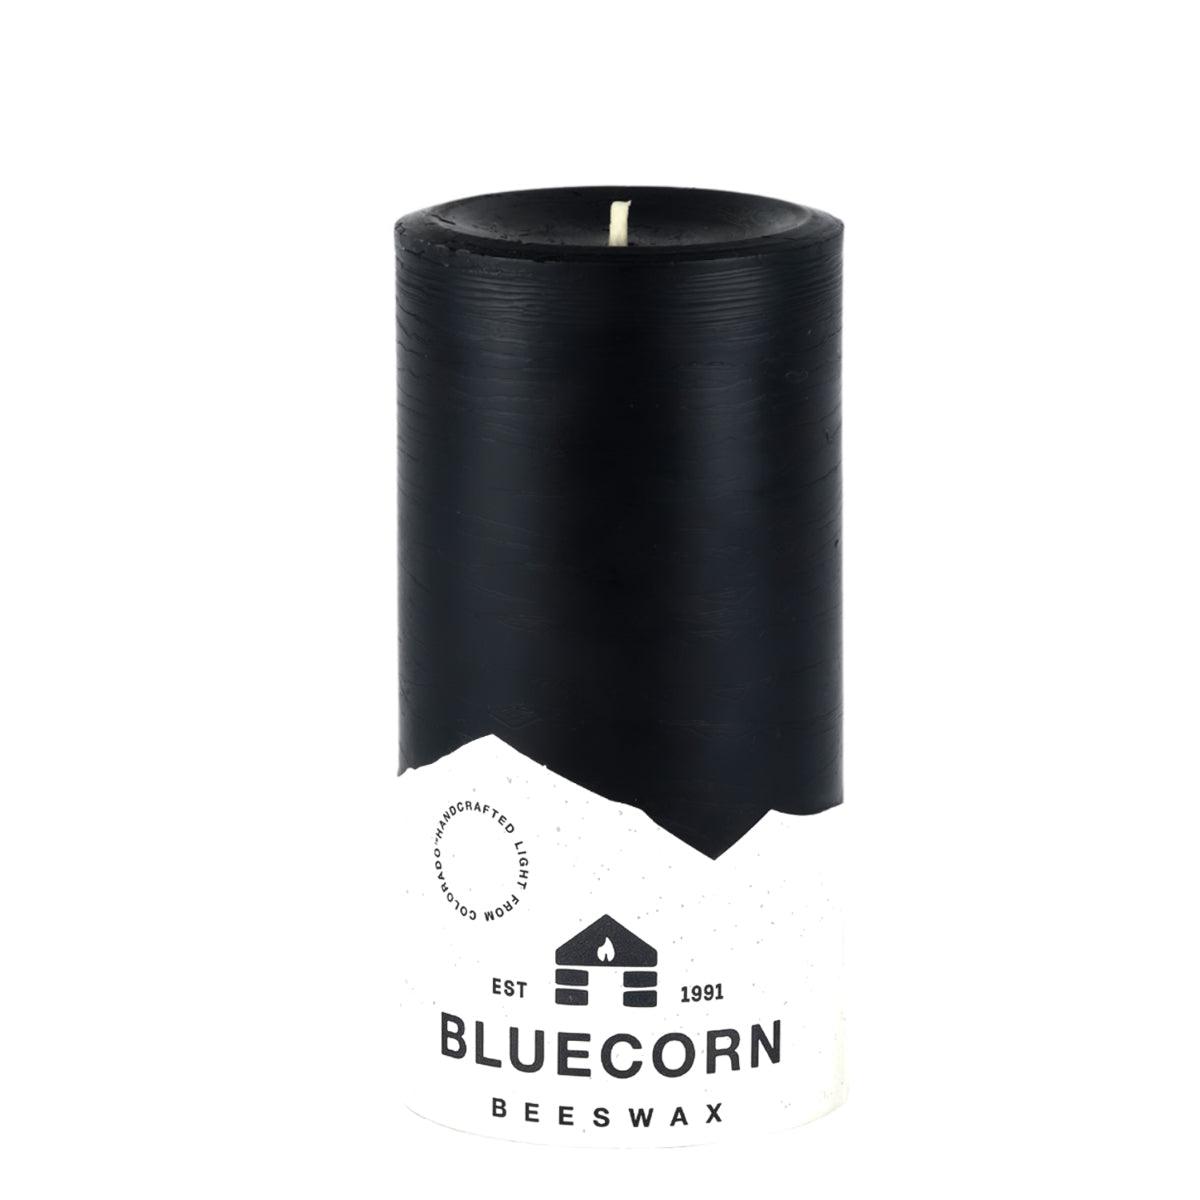 Bluecorn Beeswax 100% Pure Beeswax 3" x 6" Colored Pillar Candle is Black in color. Burn Time: 90 hours. Made with 100% Pure Beeswax, is . Made with 100% pure cotton wick, no lead and paraffin free. Clean burning and non-toxic. Features Bluecorn Beeswax label printed on 100% recycled paper.